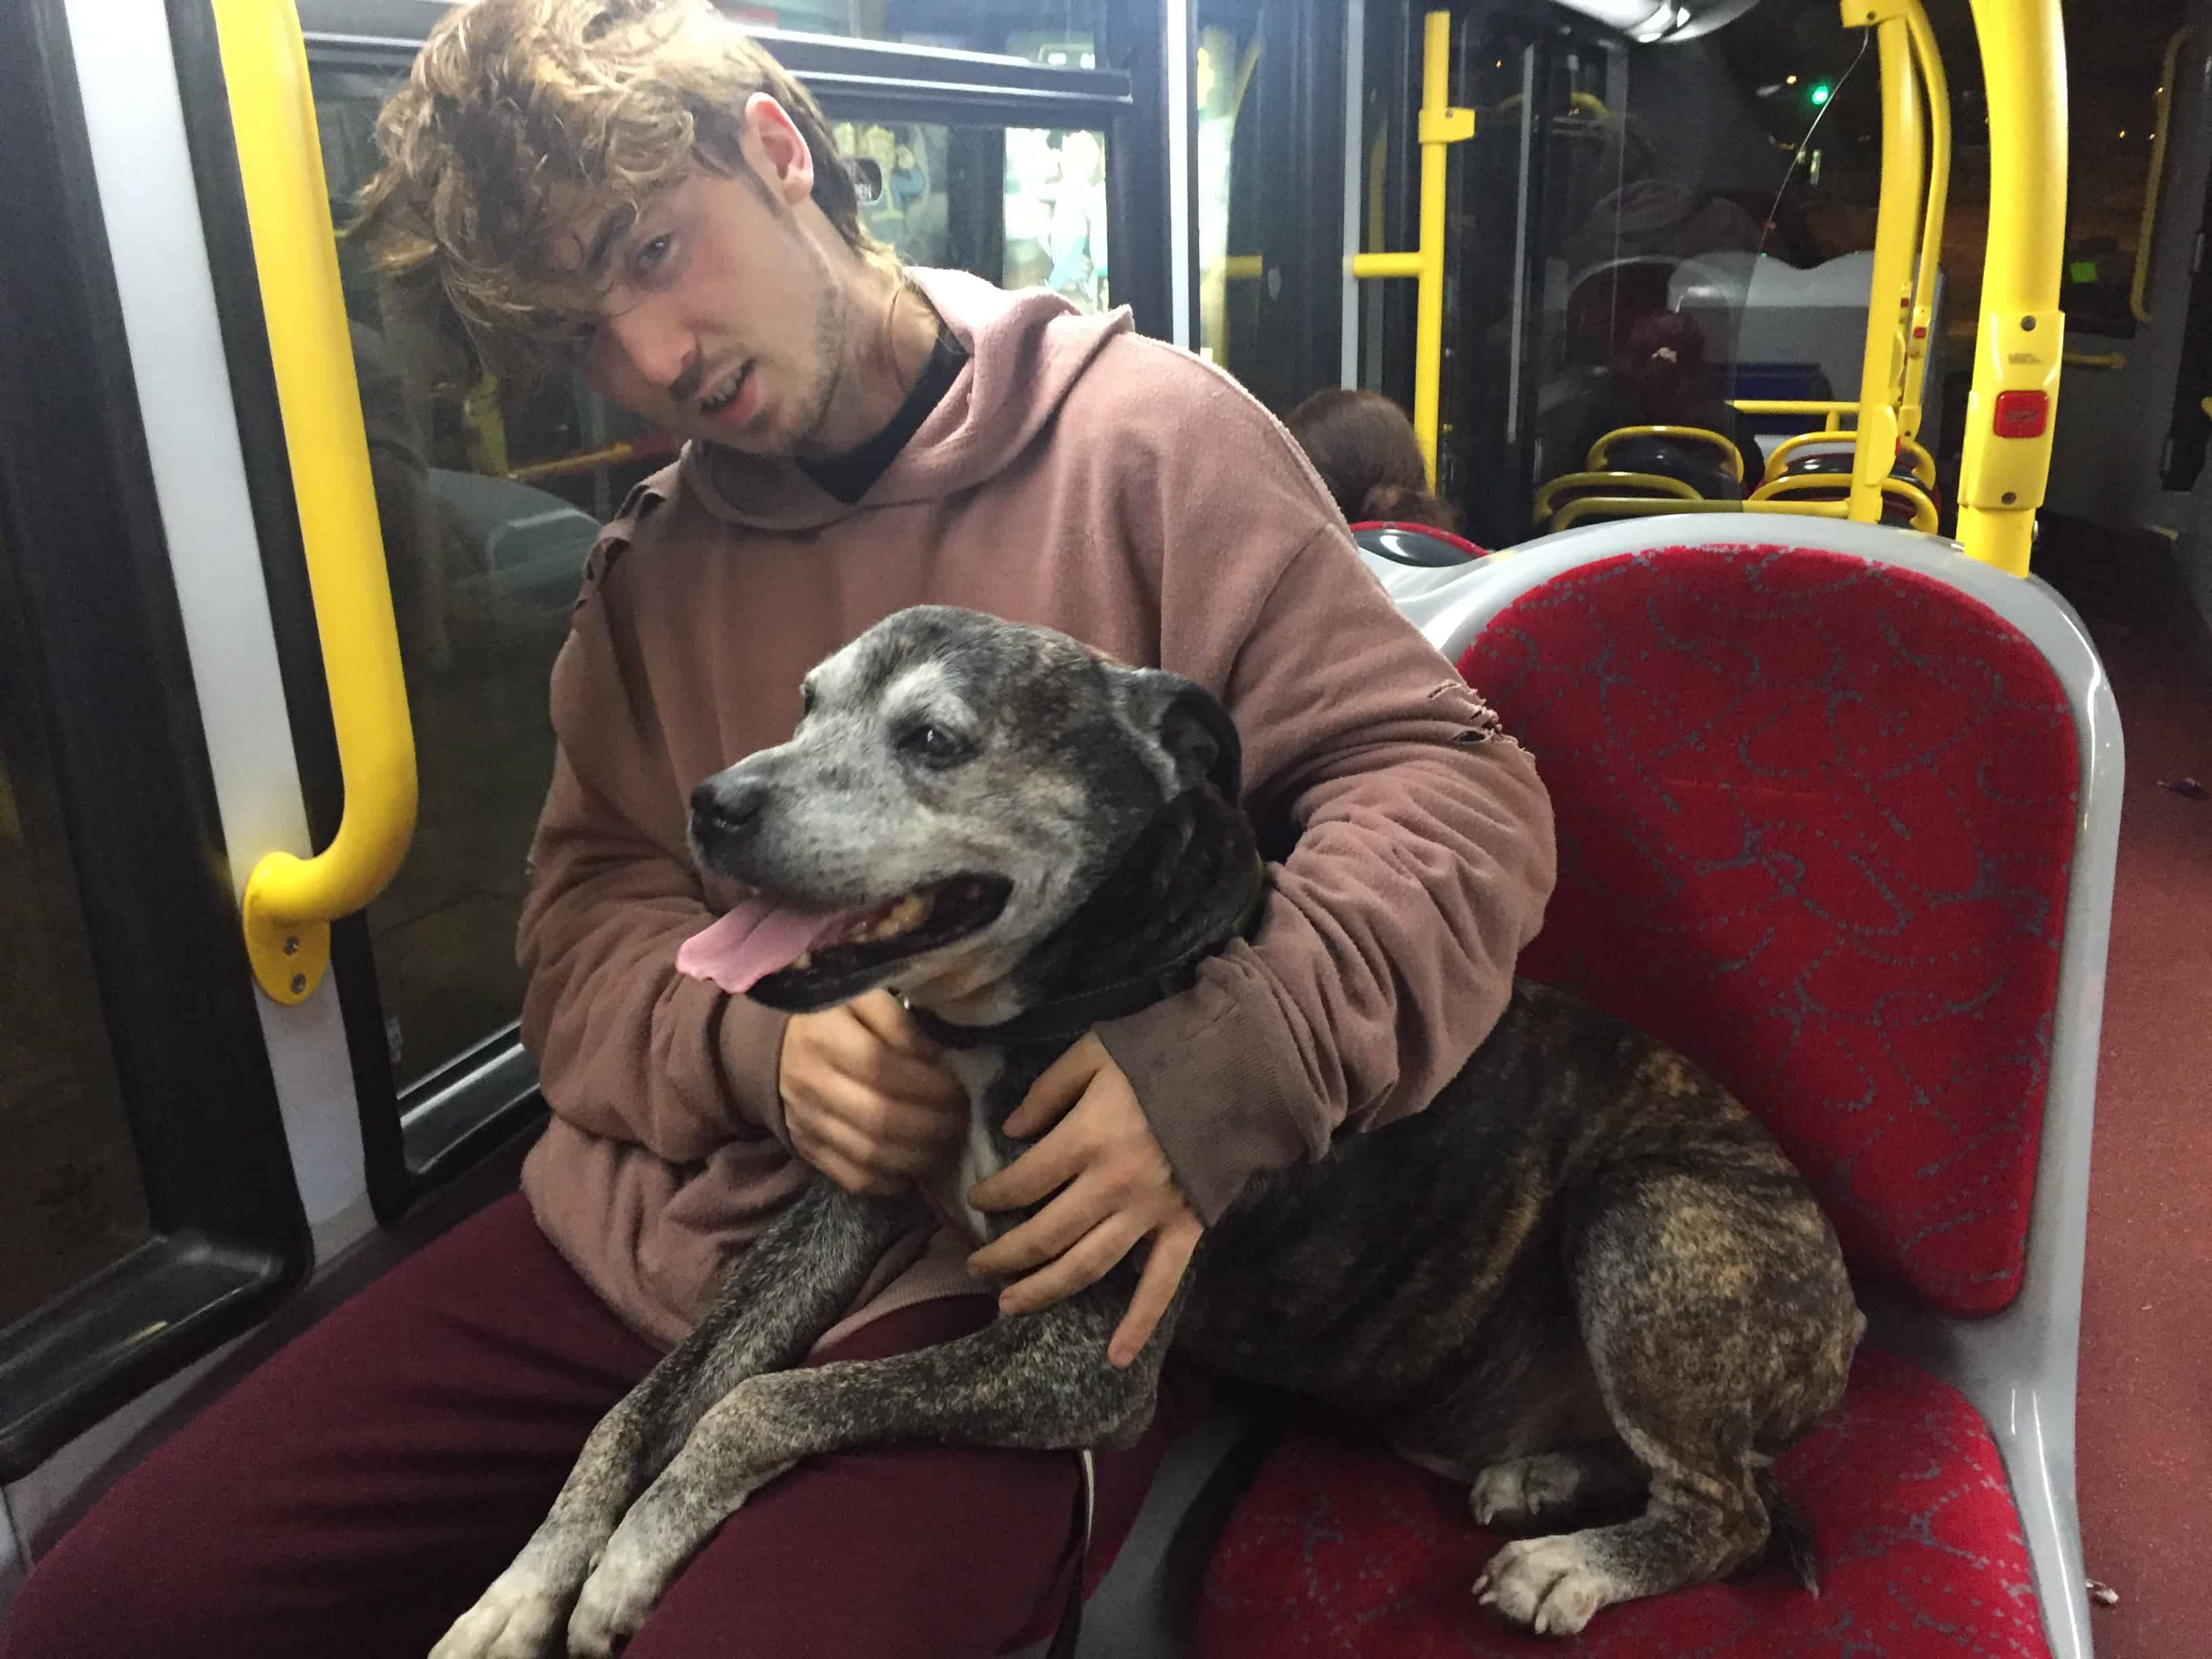 Popular Ryan, 20, pictured with his beloved dog Tigger